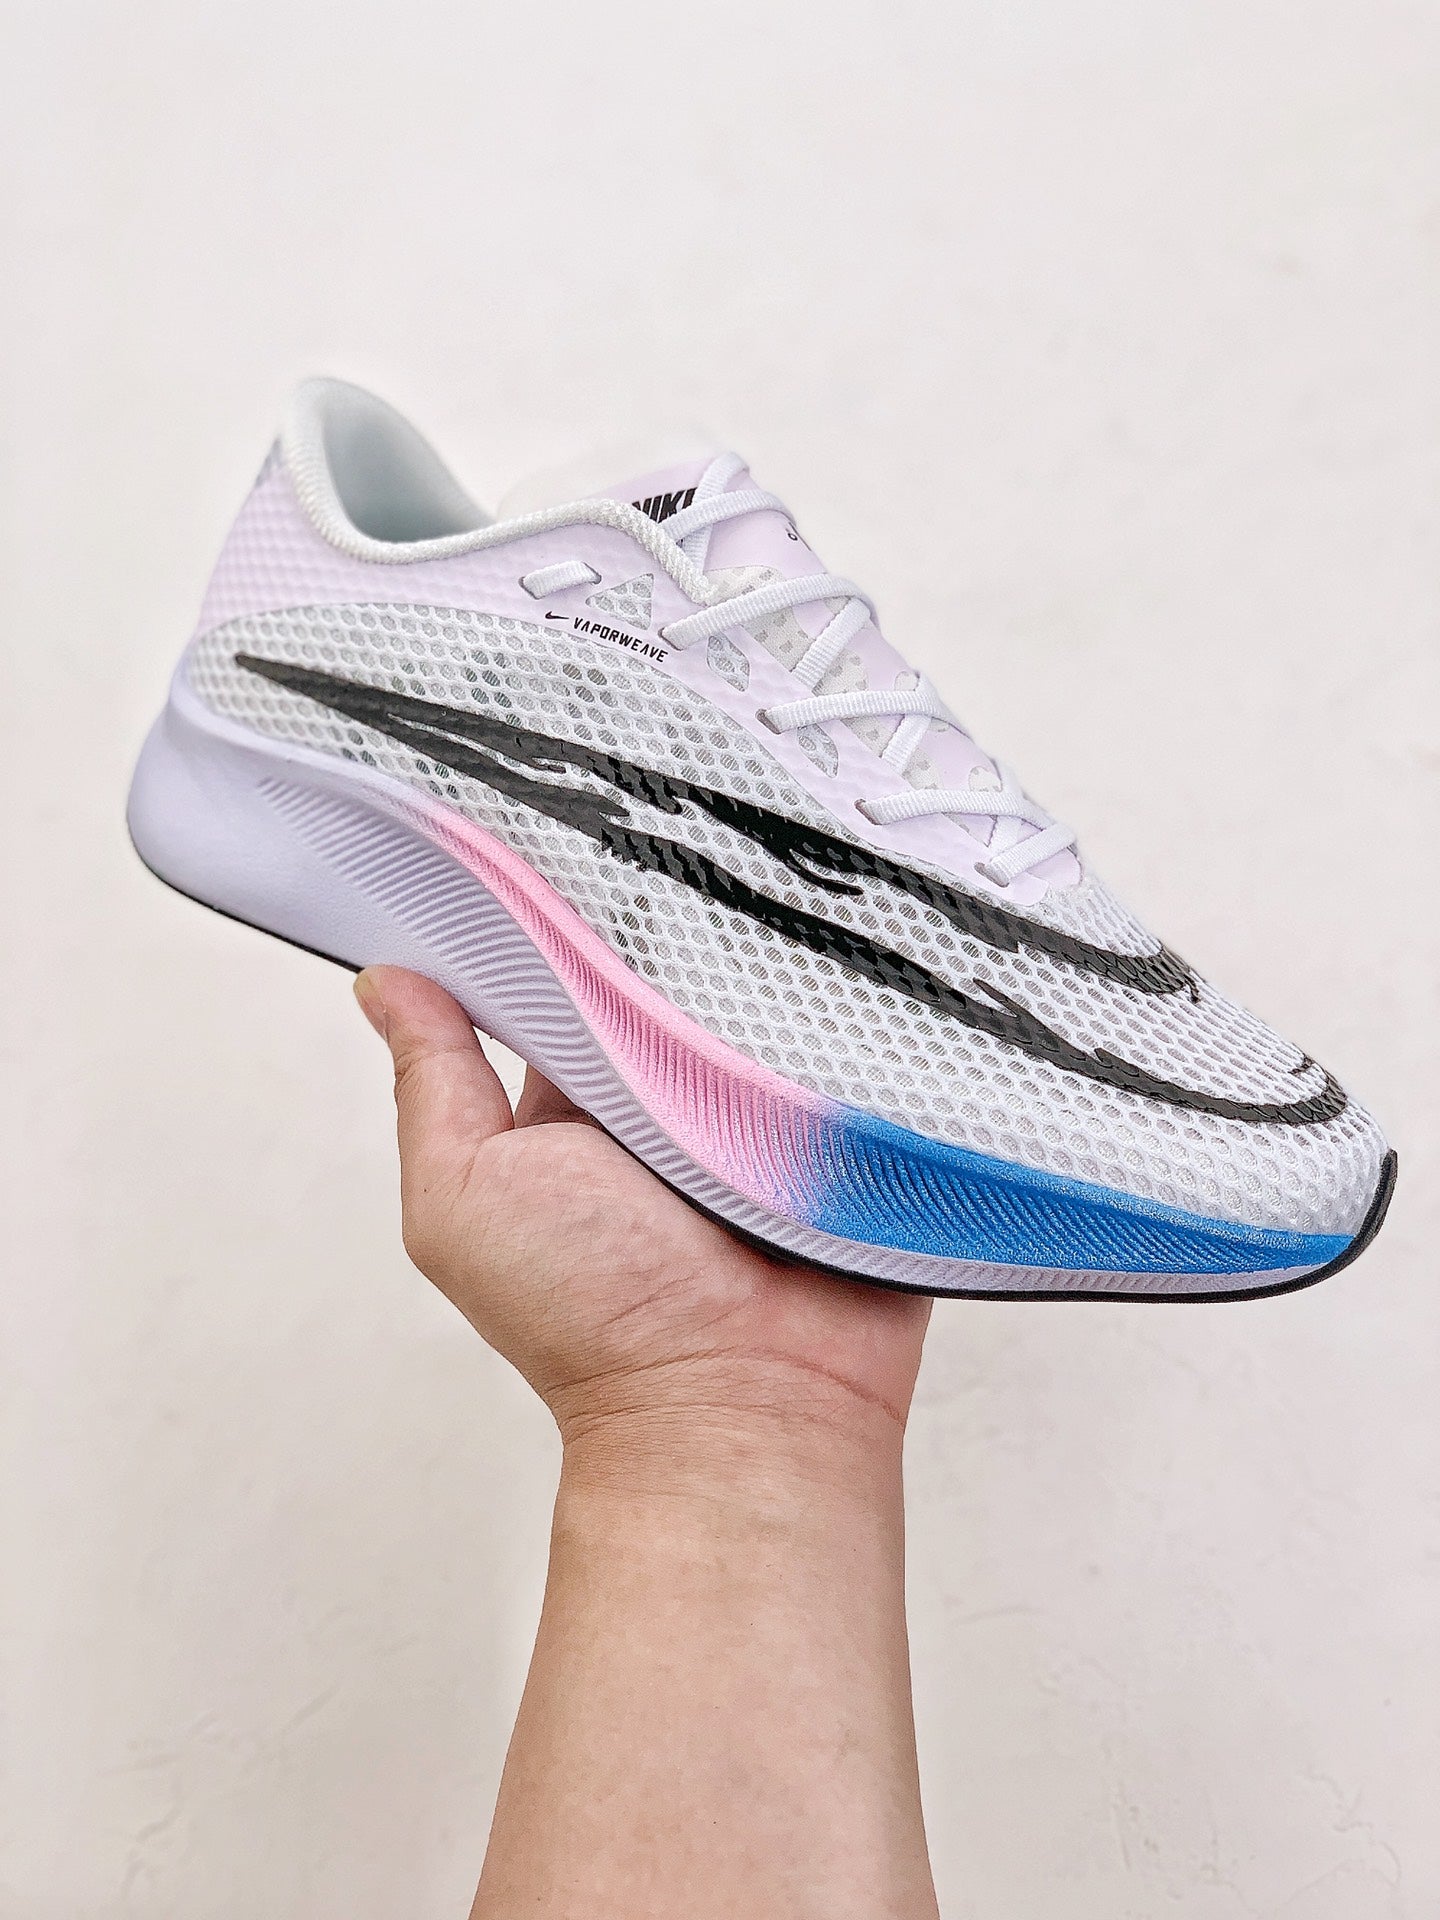 NK zoom Fly 7 White Blue Pink